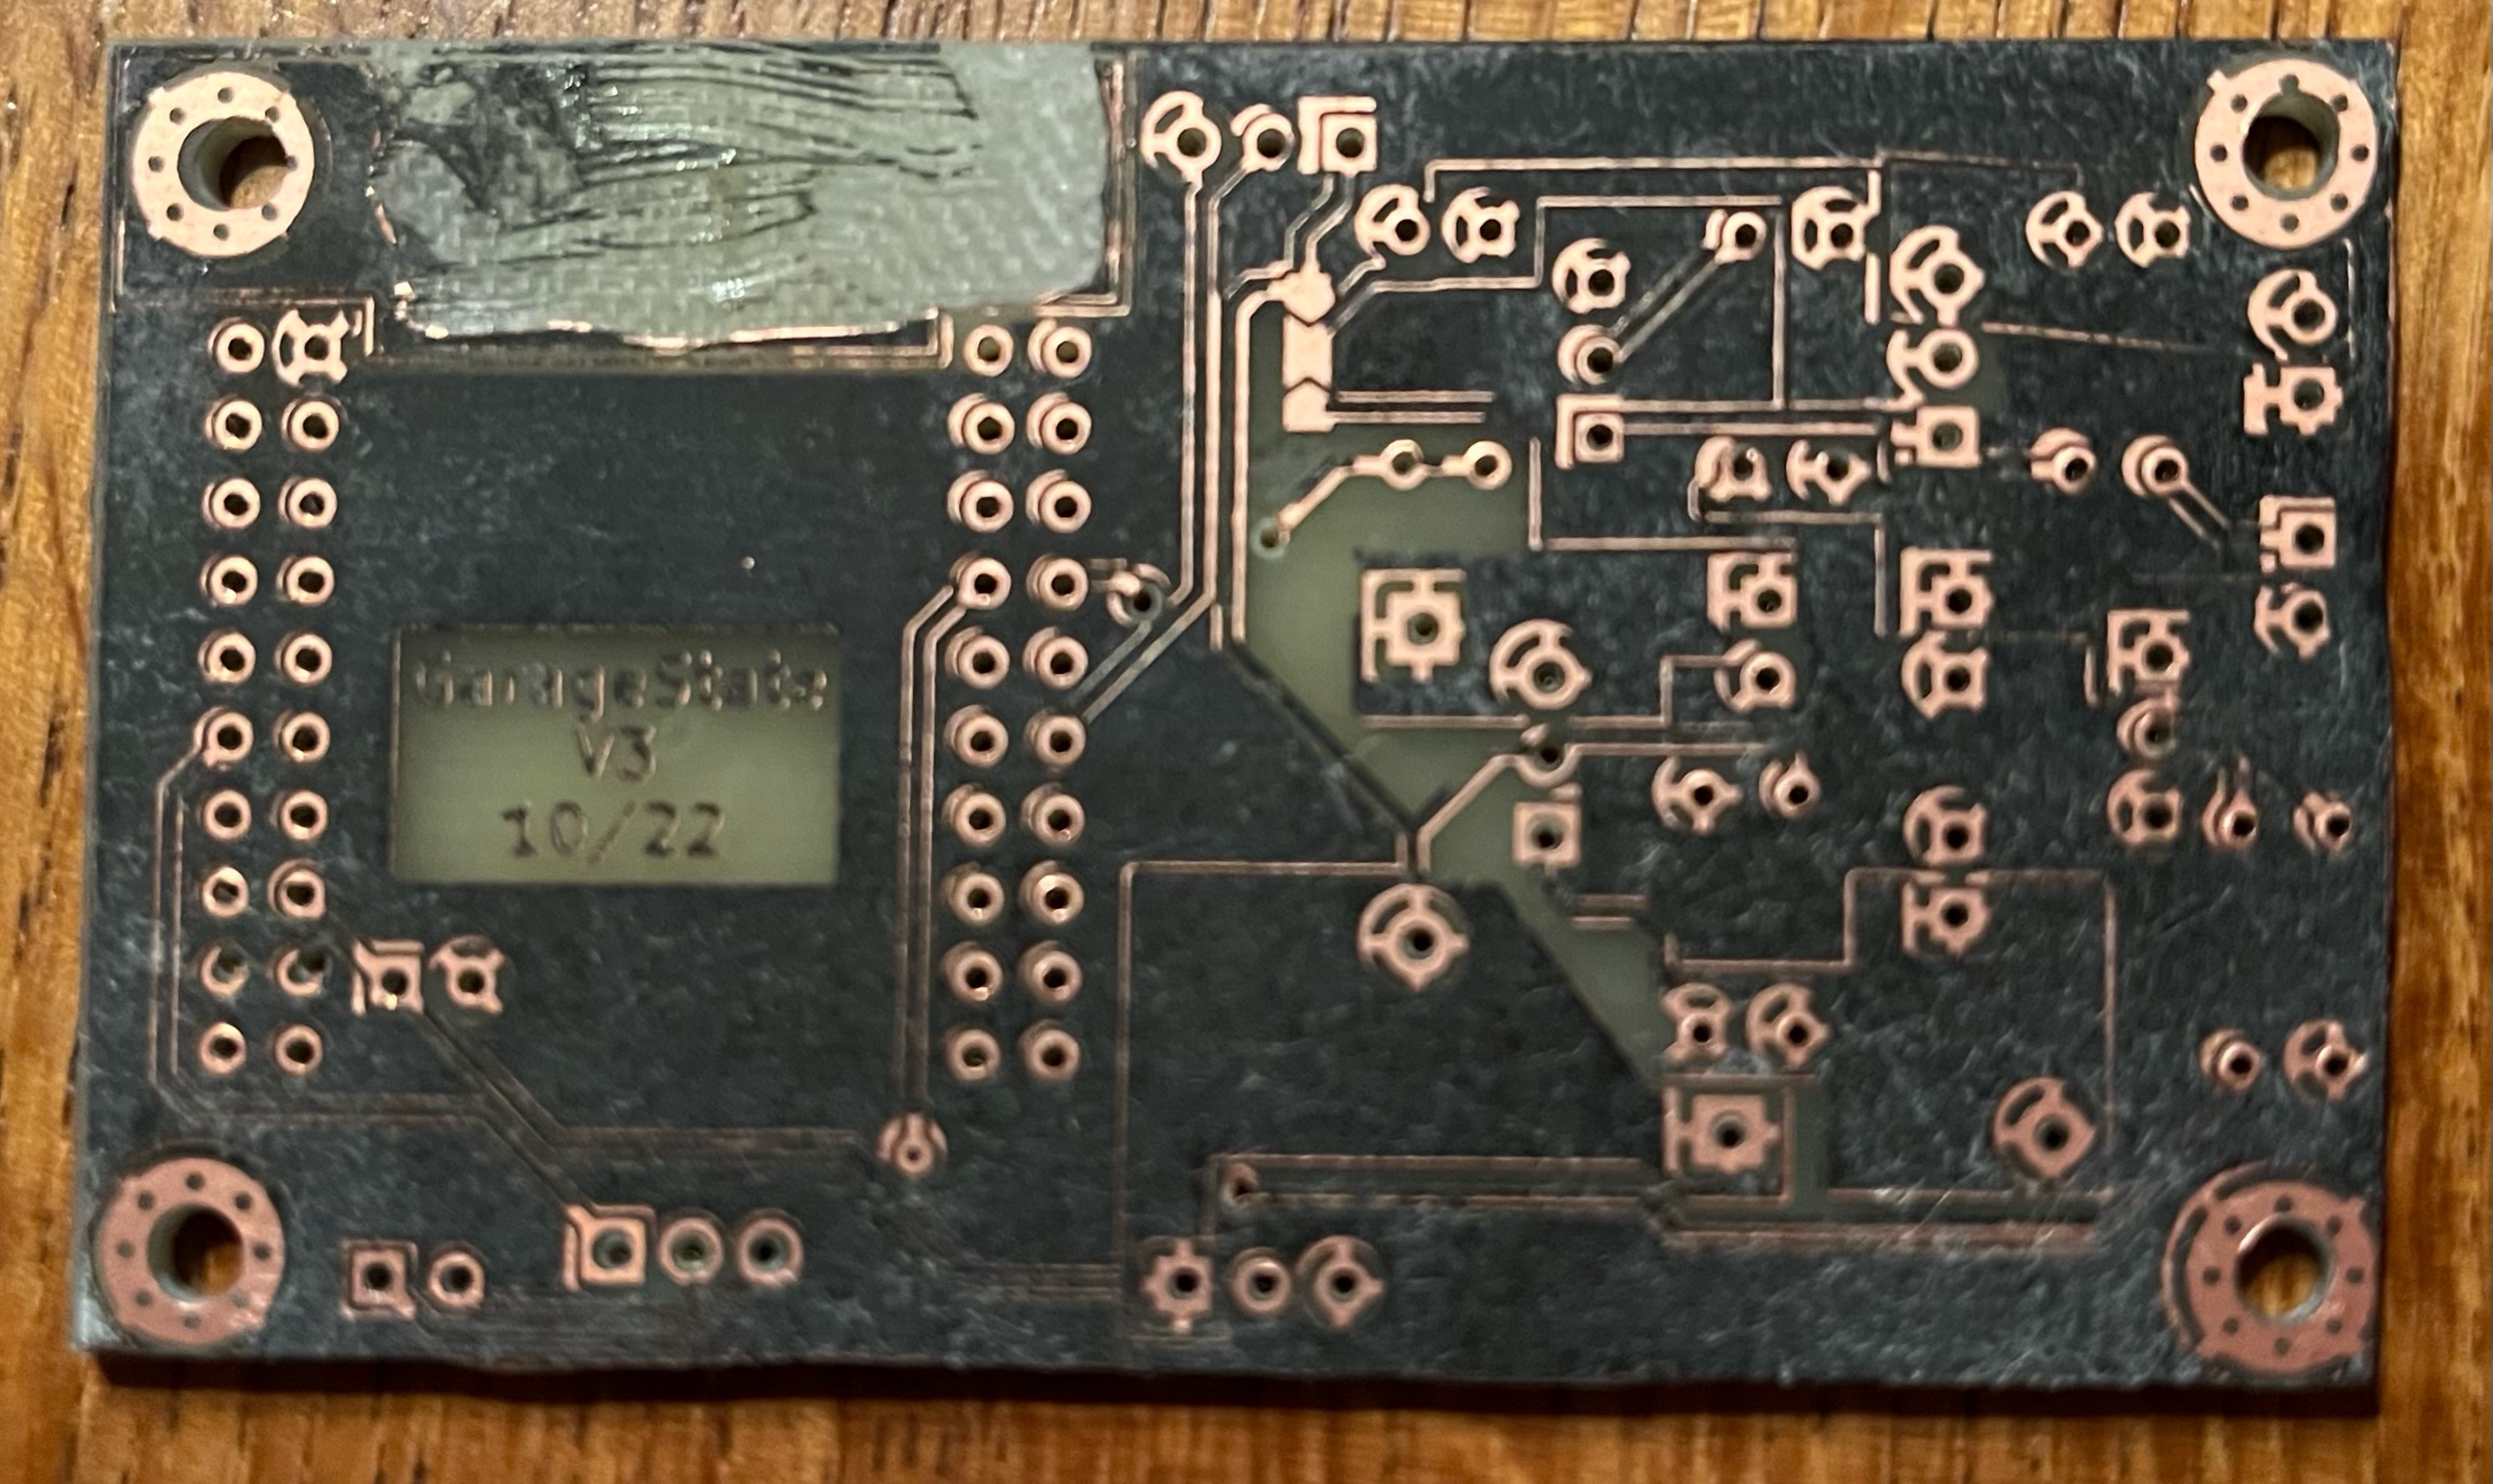 The final product: Single layer PCB with solder mask